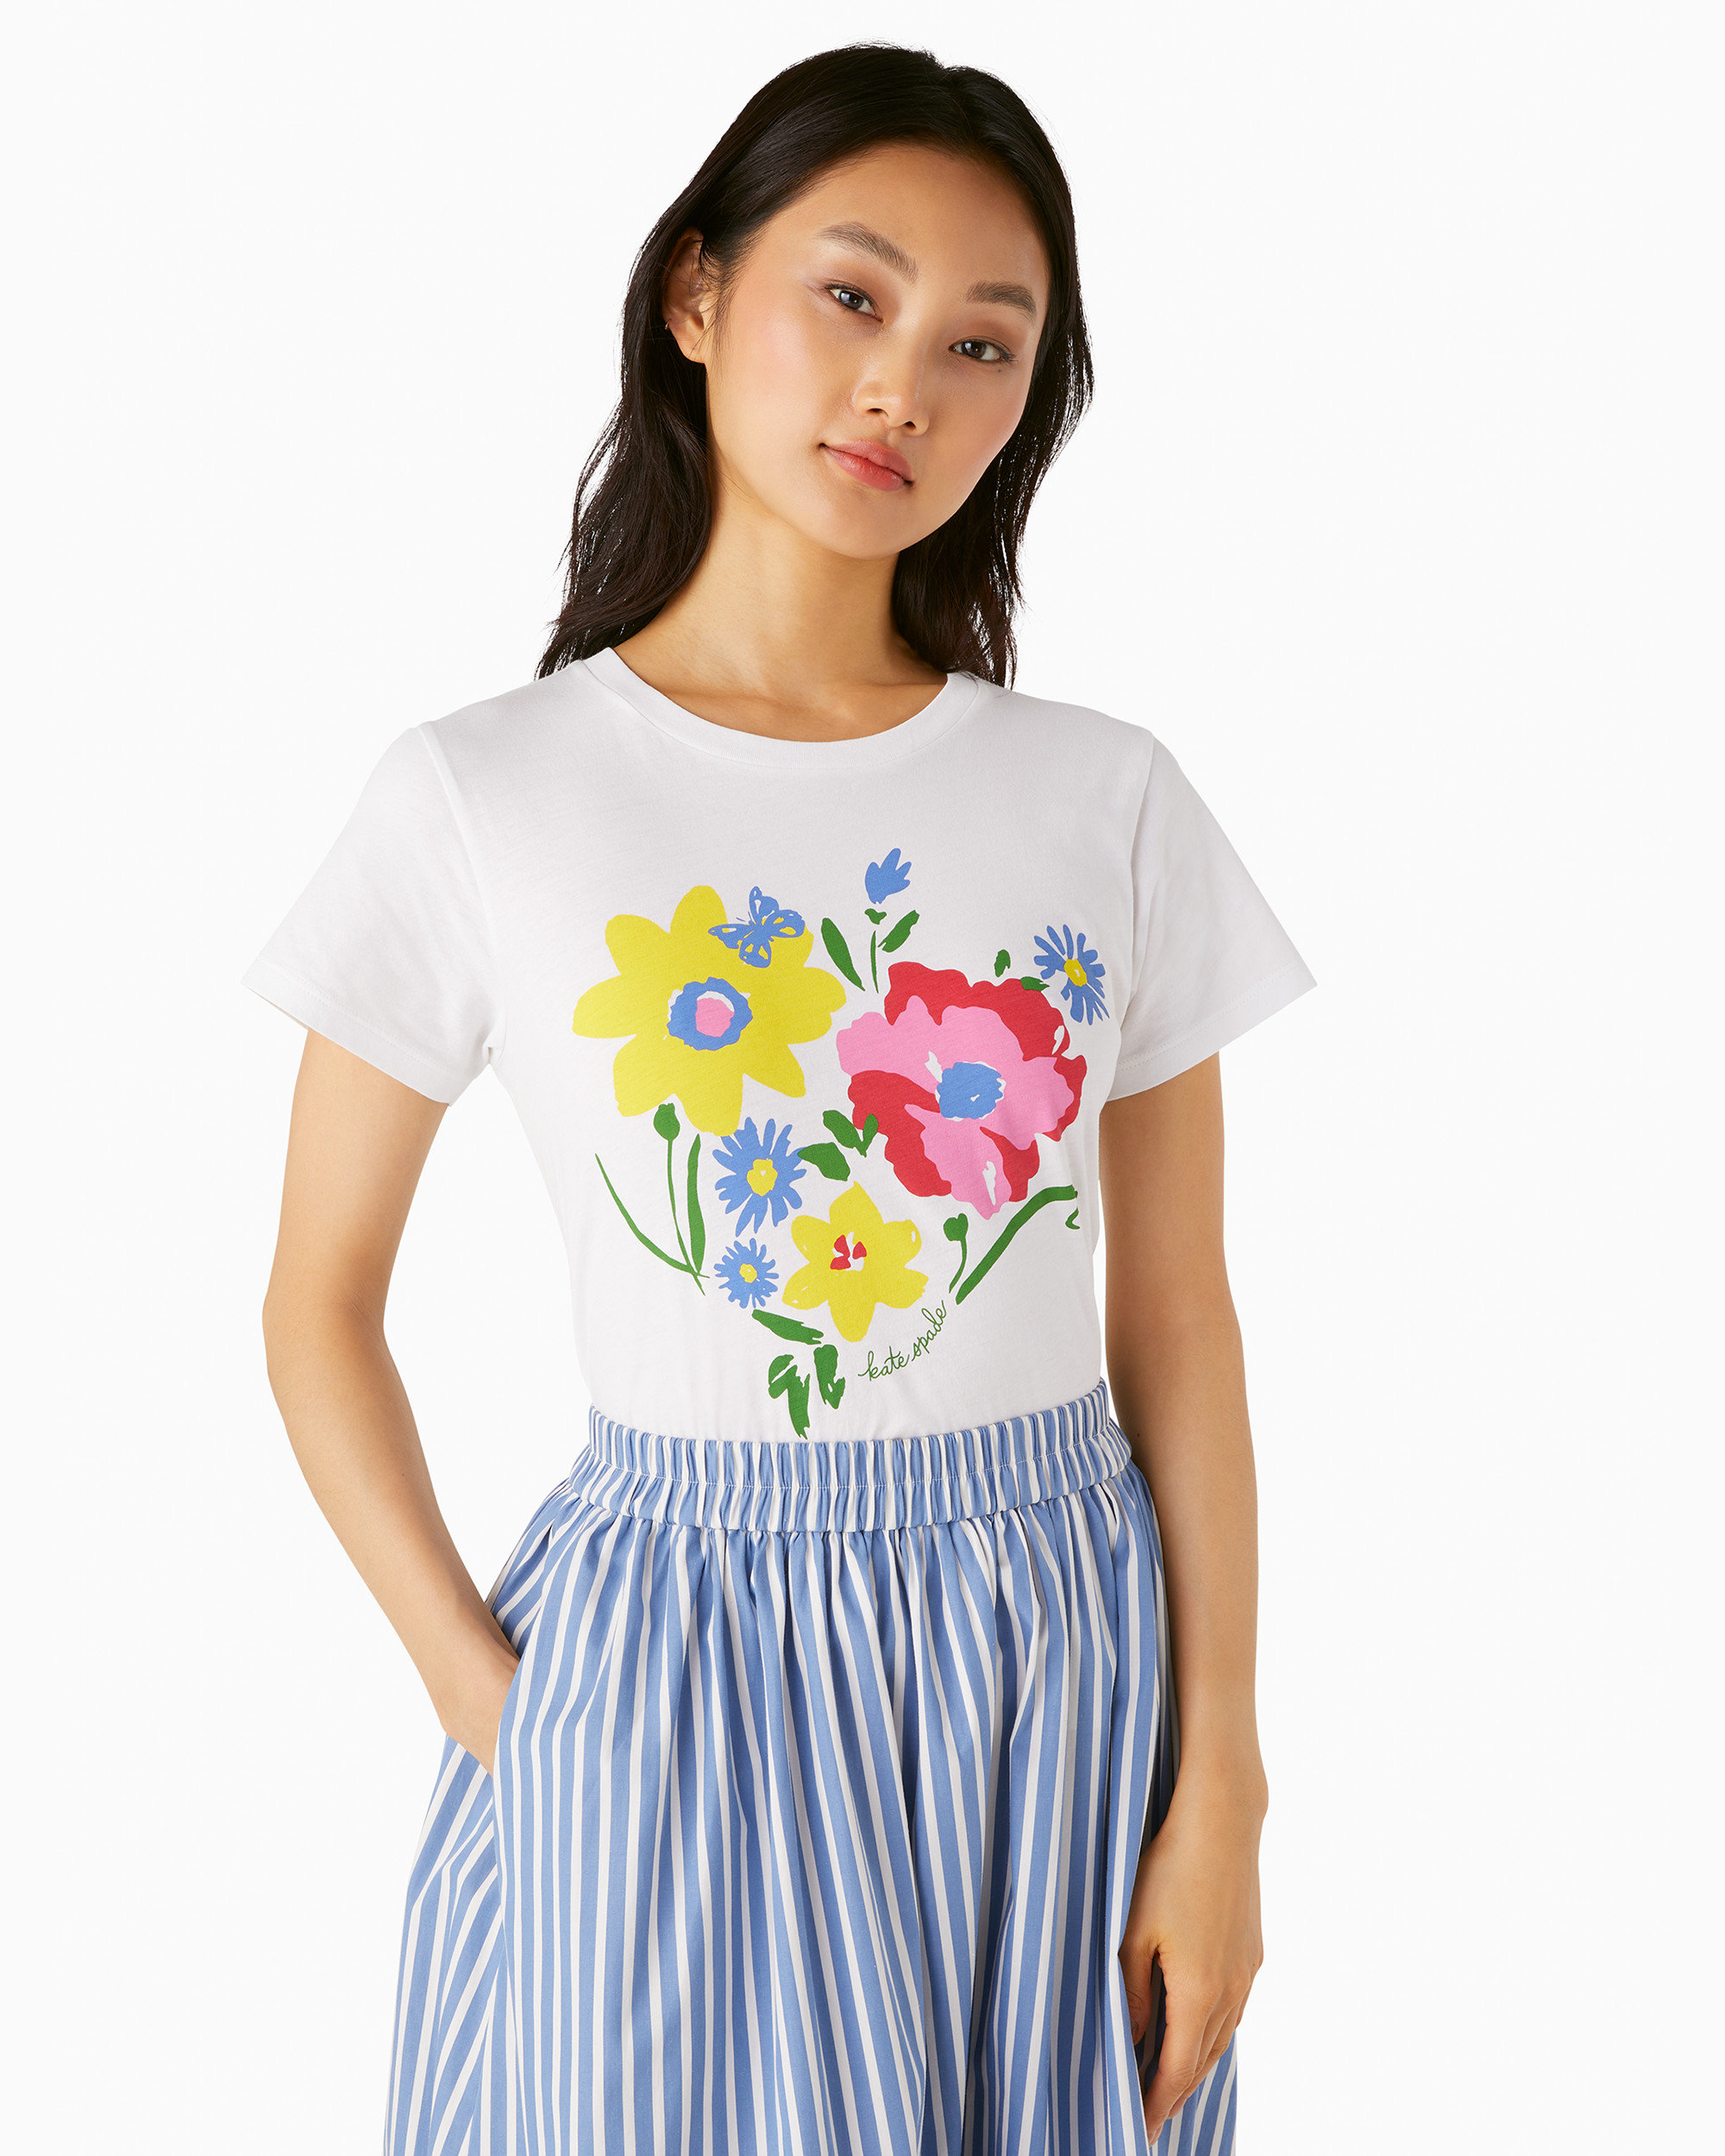 Kate Spade New England Floral Tee